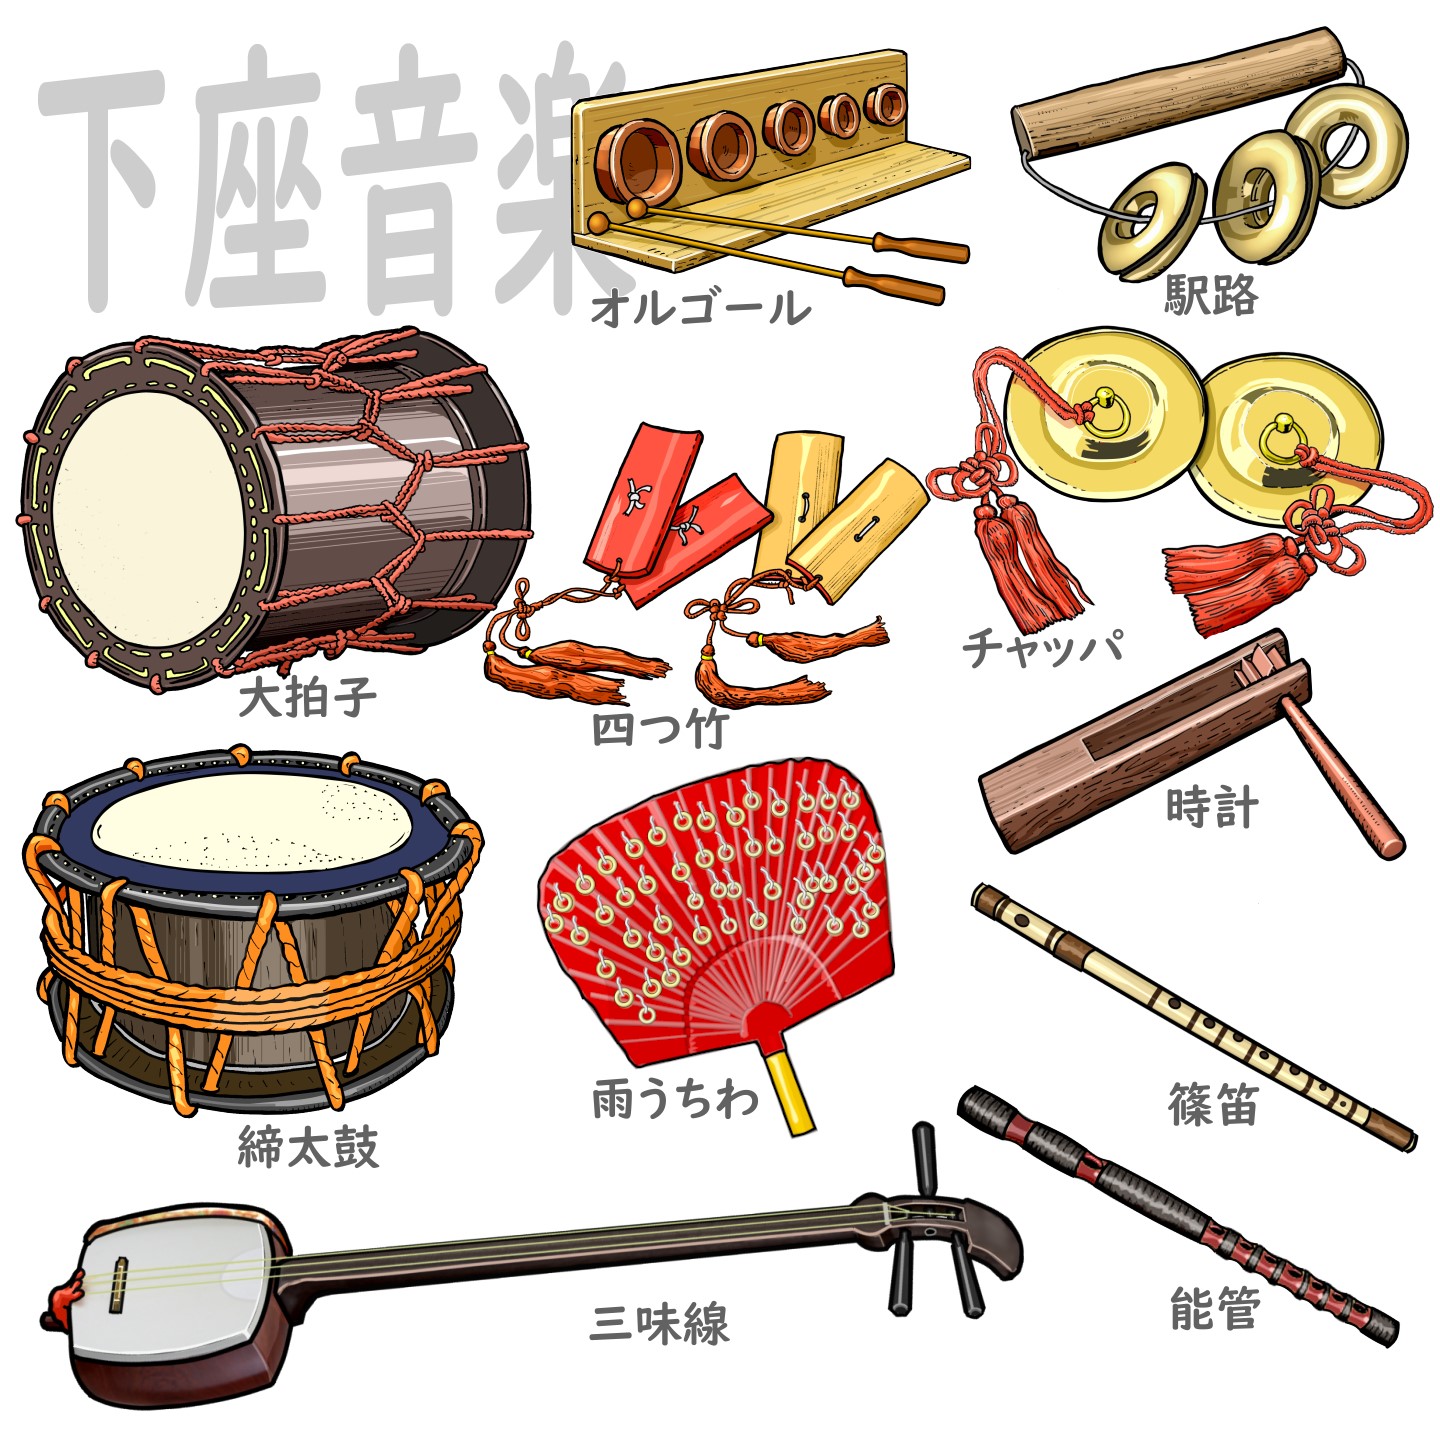 yŎgĂy instruments used in Geza music